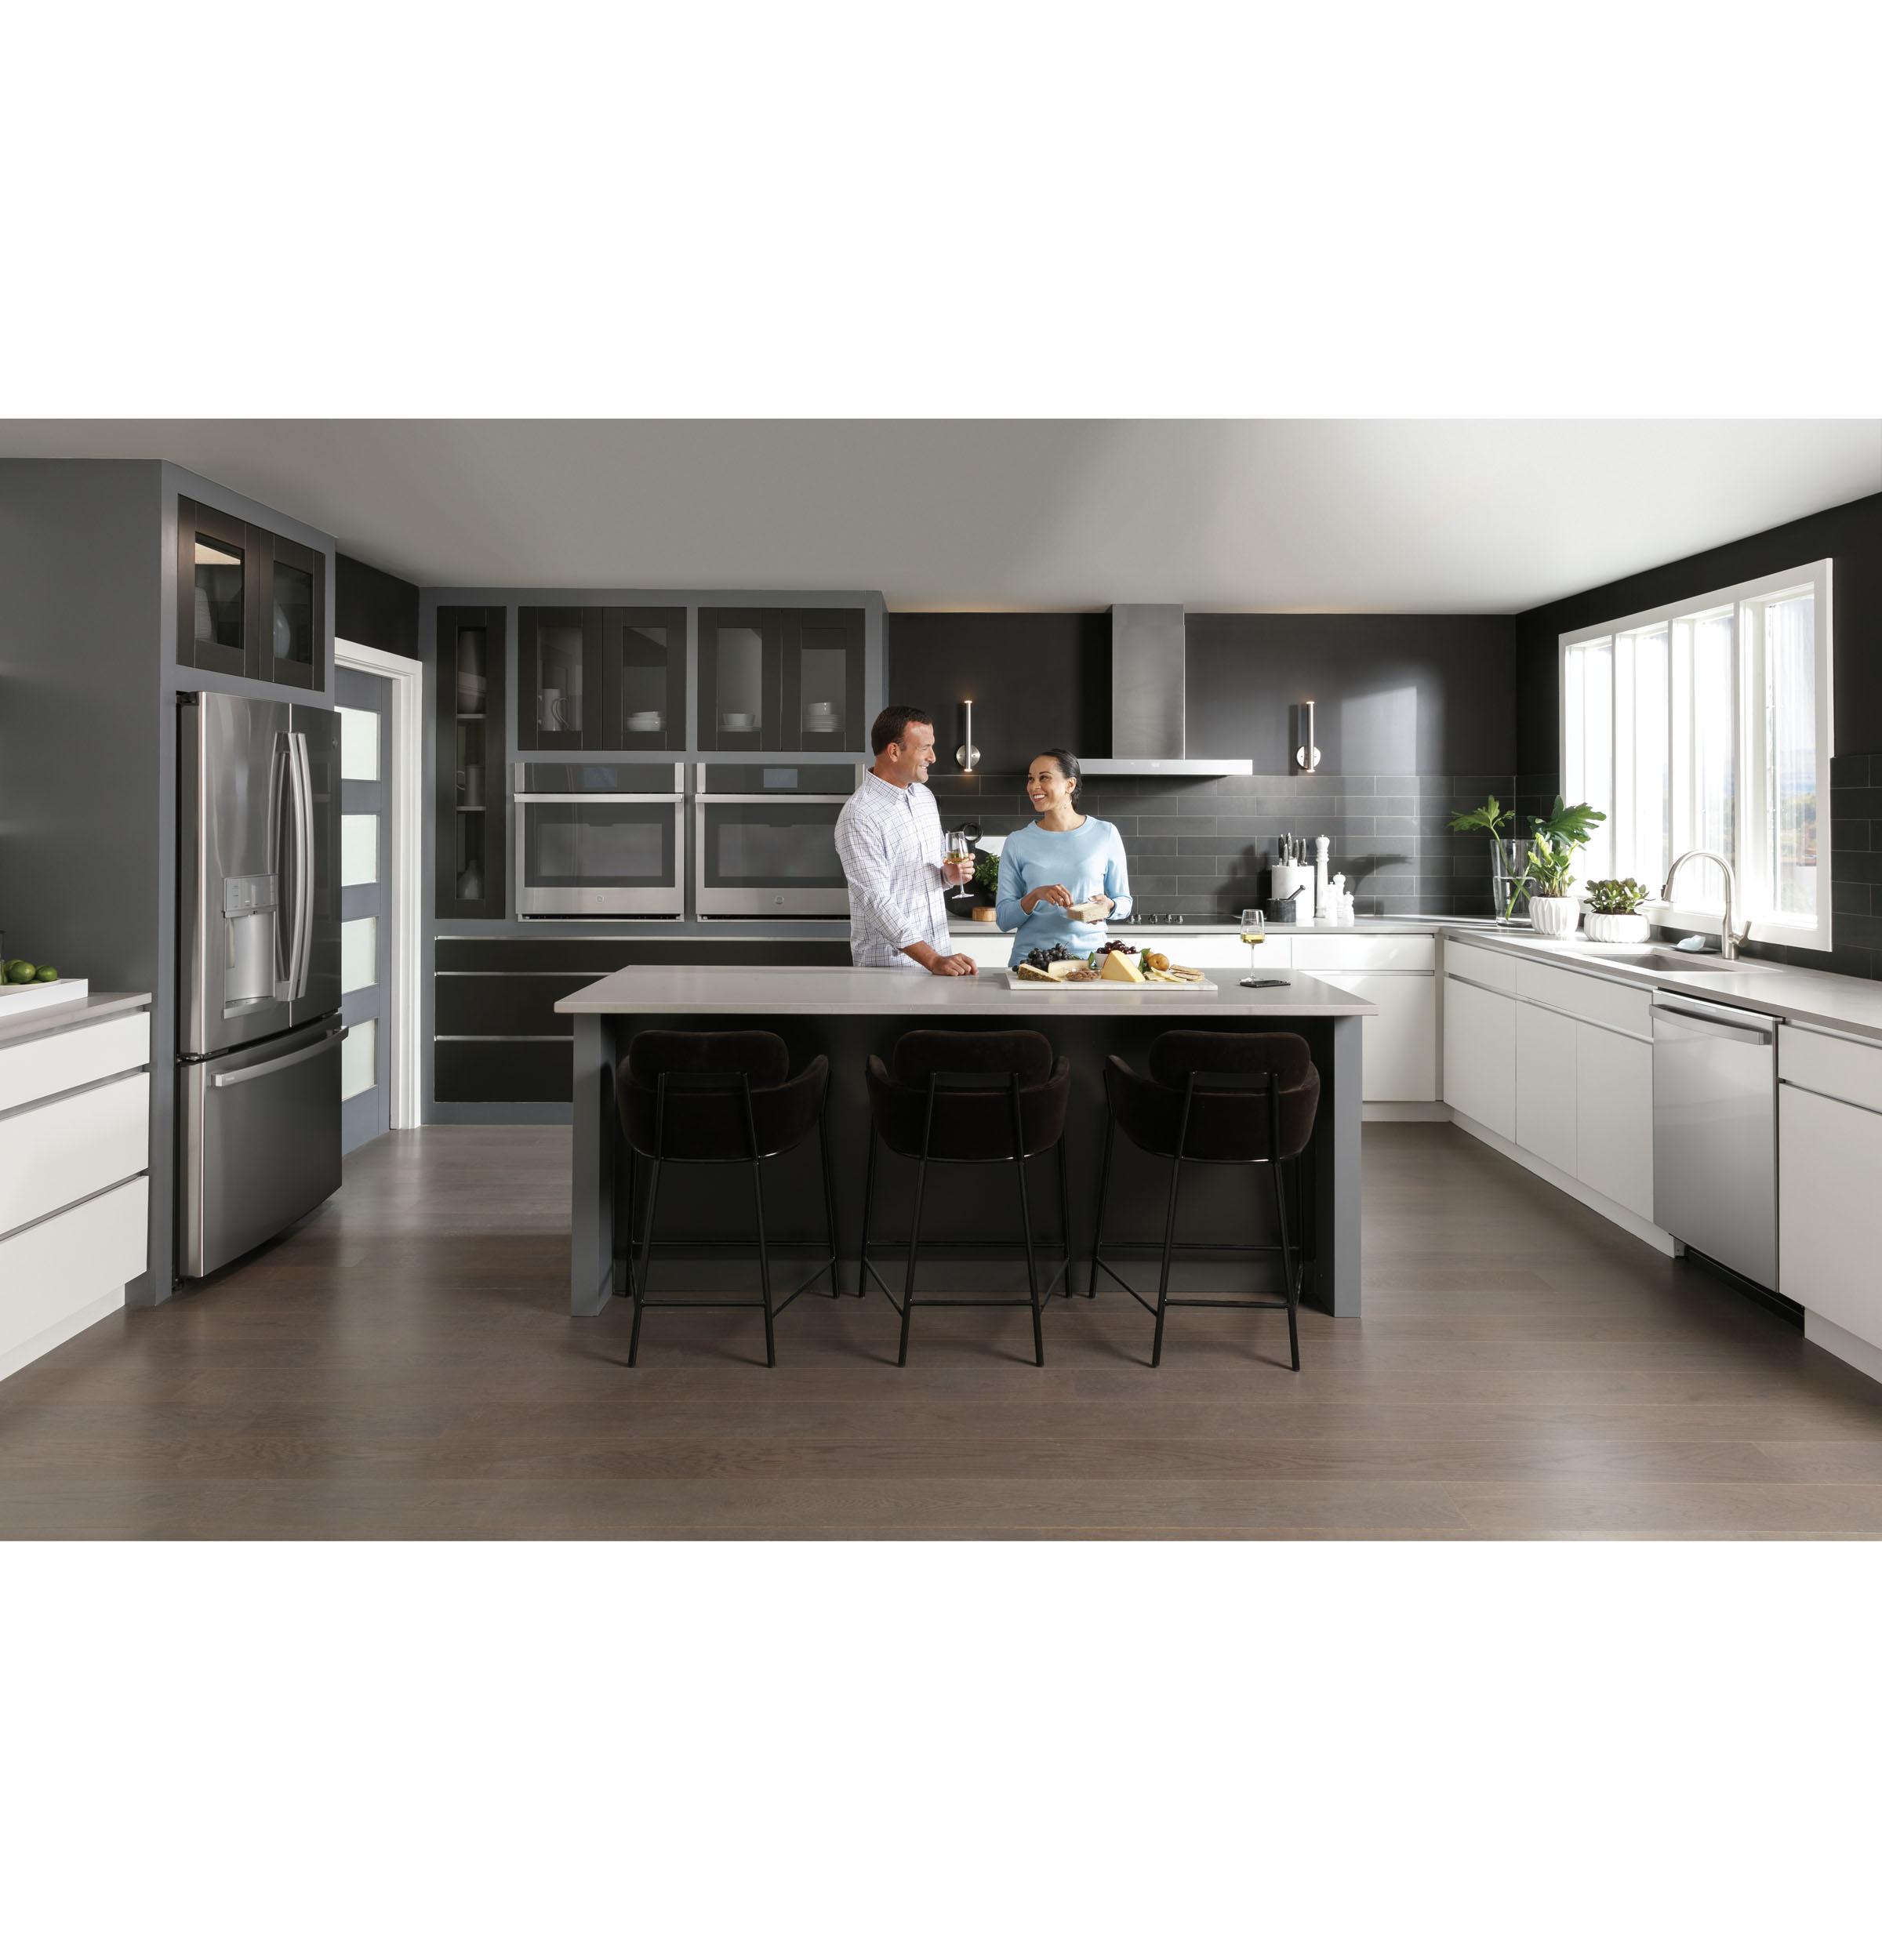 GE Profile™ ENERGY STAR® Fingerprint Resistant Top Control with Stainless Steel Interior Dishwasher with Sanitize Cycle